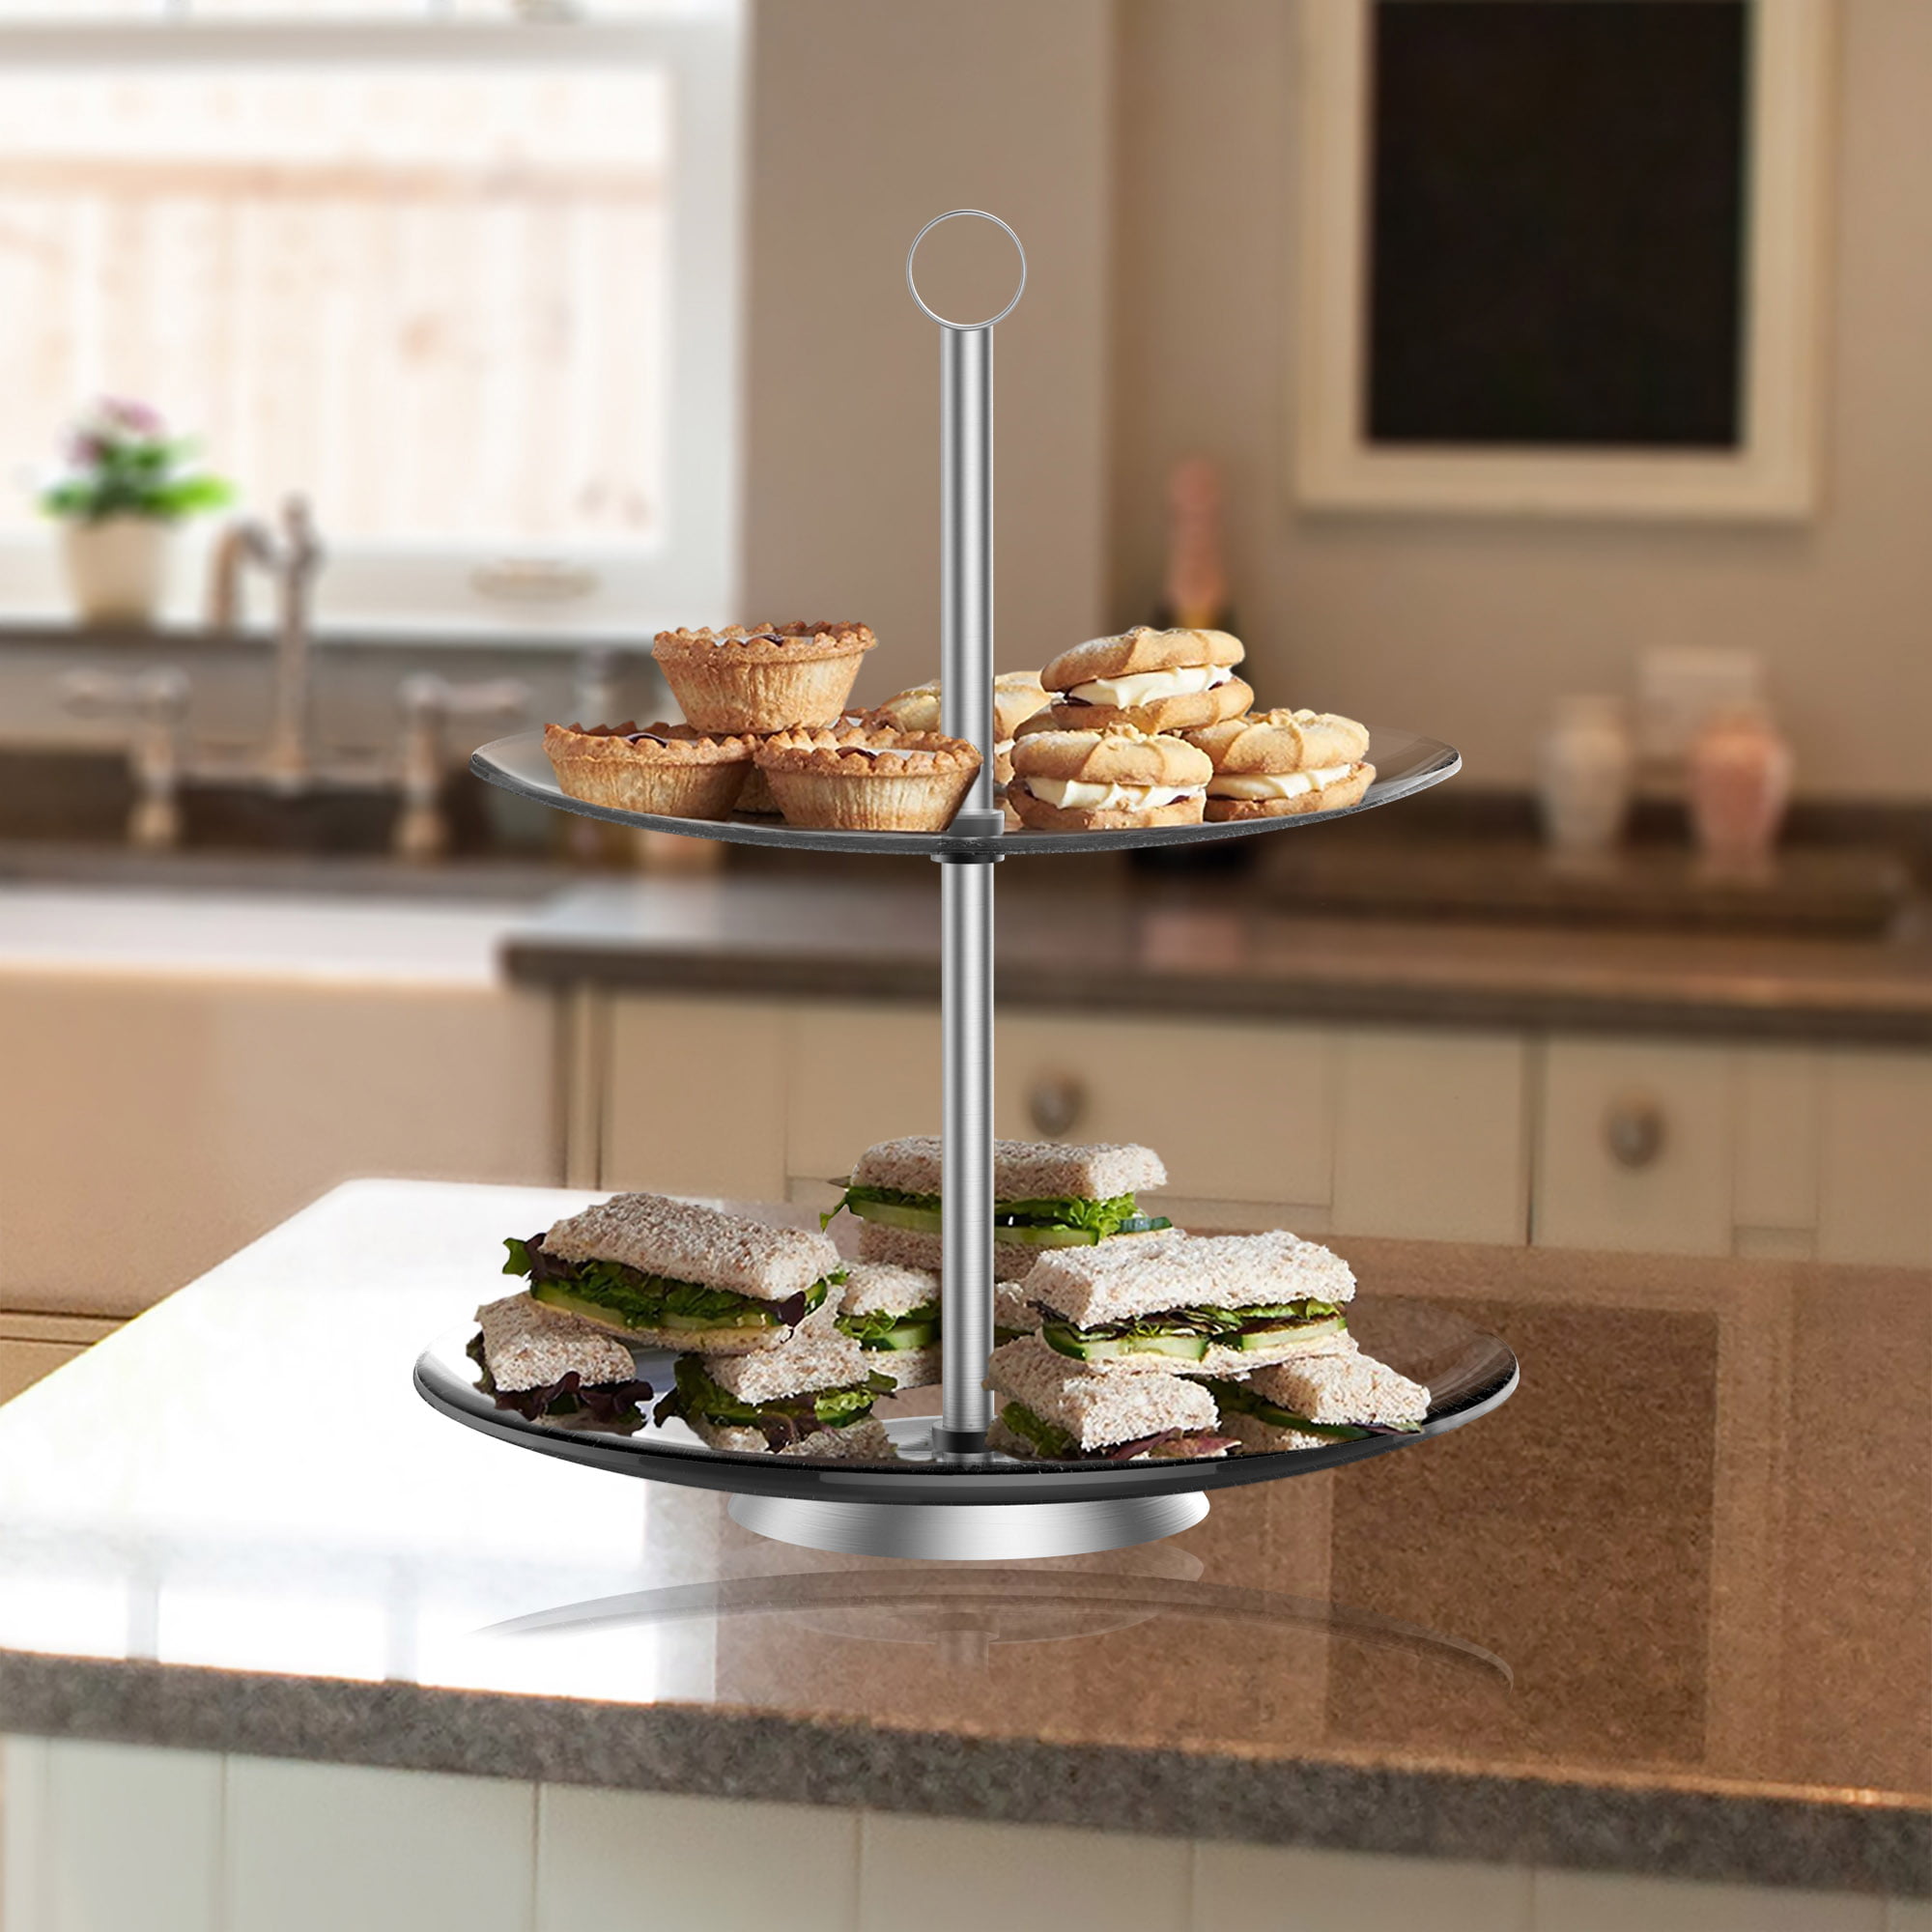 Pastry Candy Cookie Wedding Display Details about   Two Tier Dessert Stand with Mirror Plates 